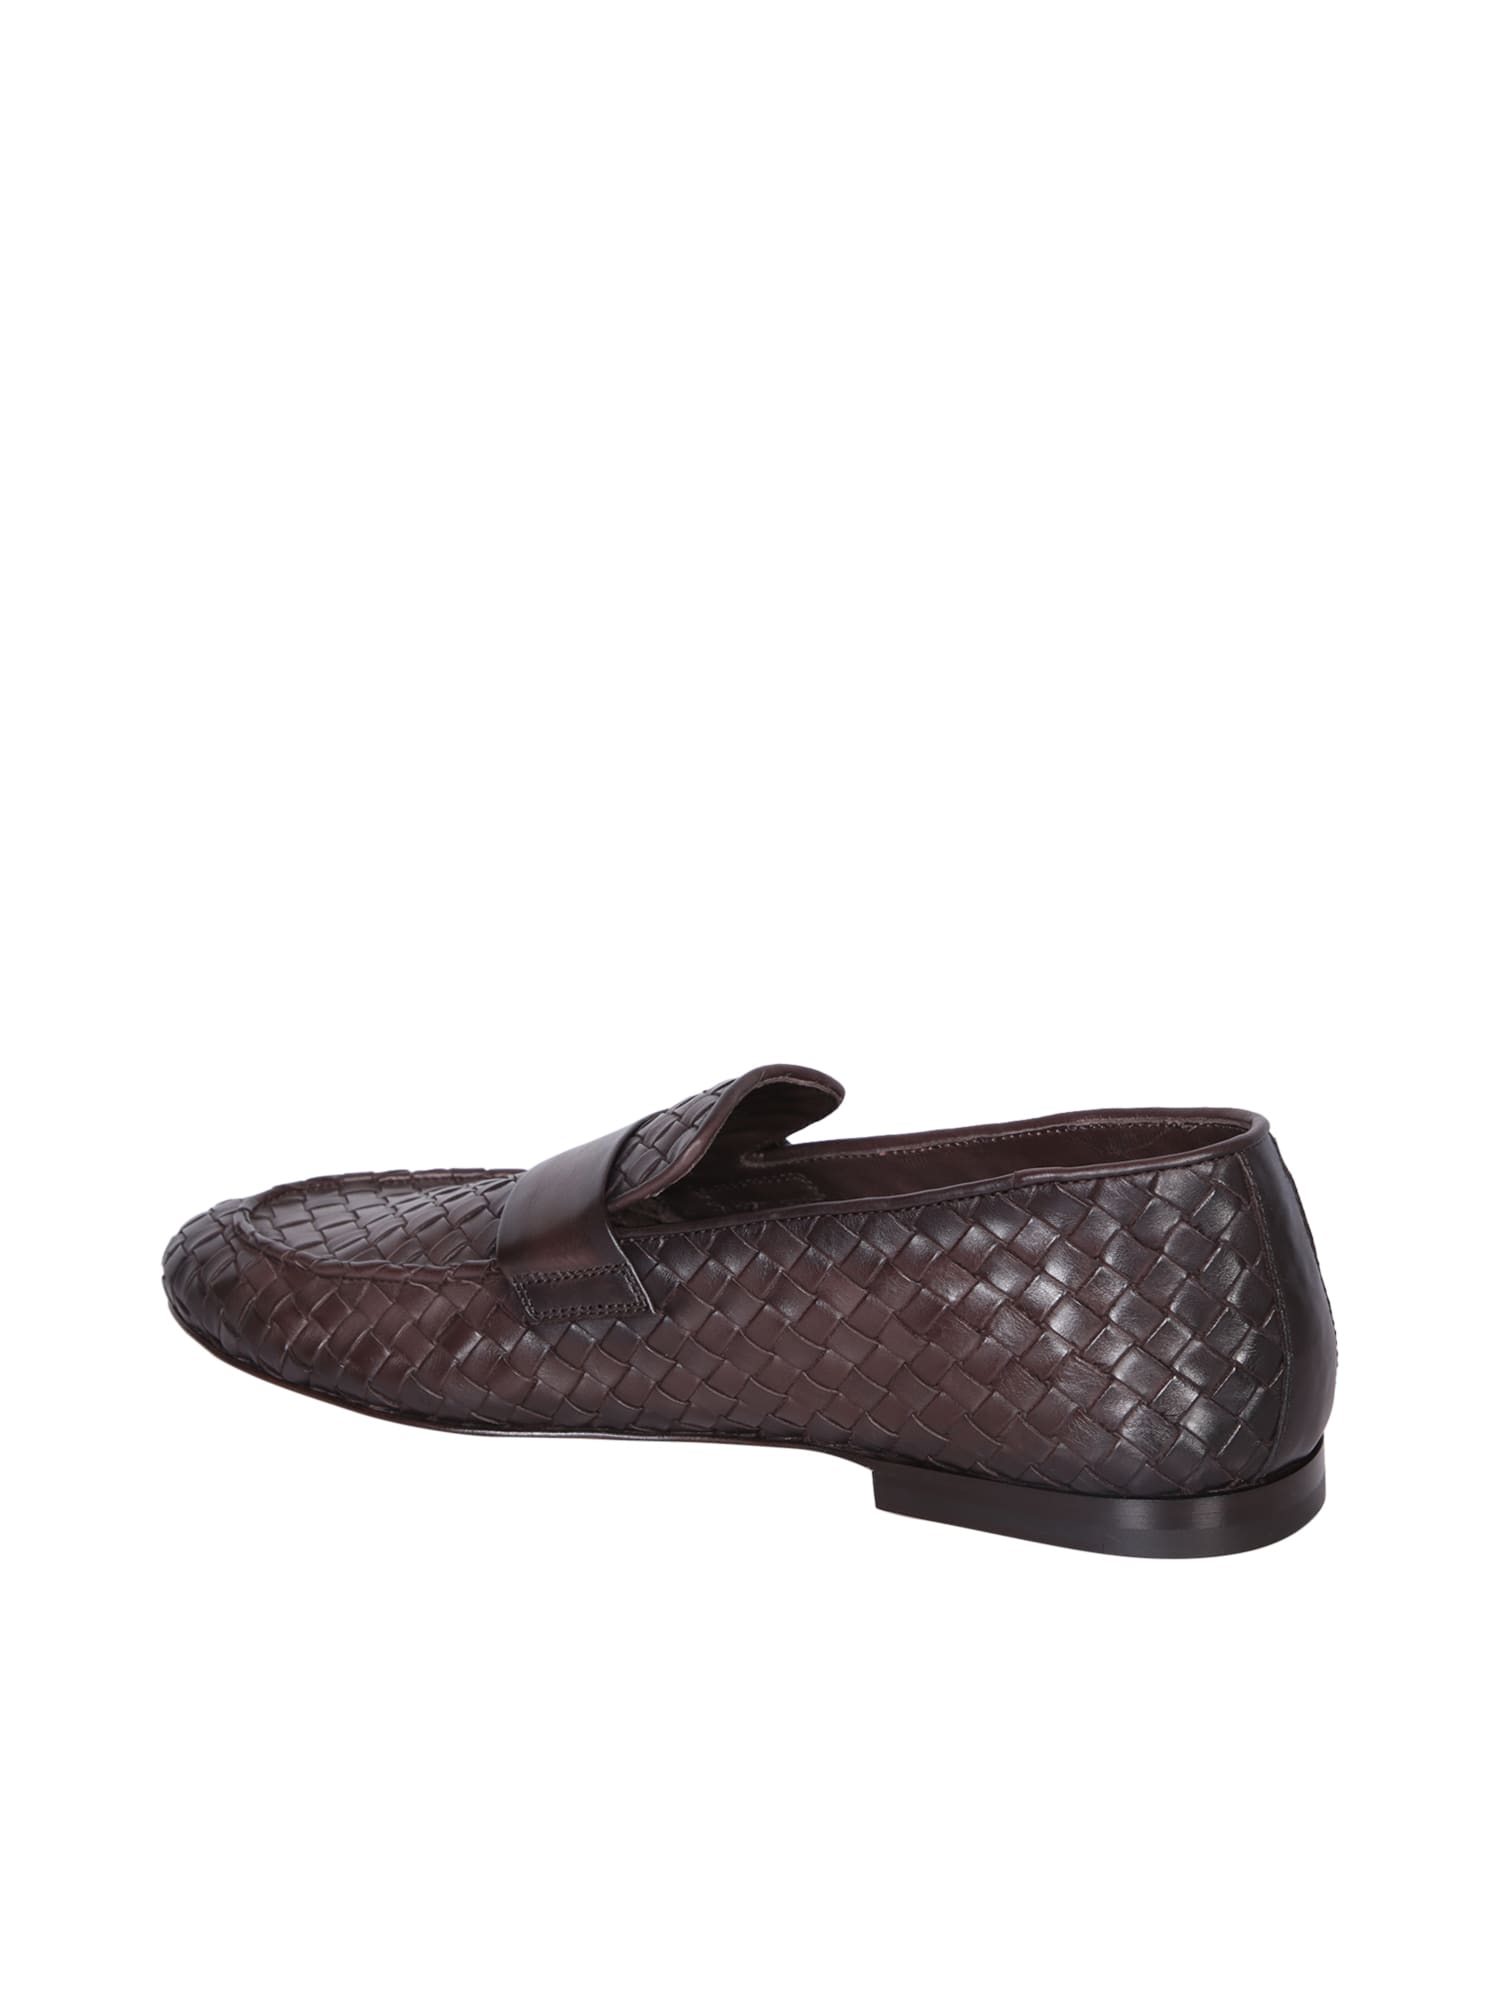 Shop Officine Creative Airto 011 Braided Brown Loafer